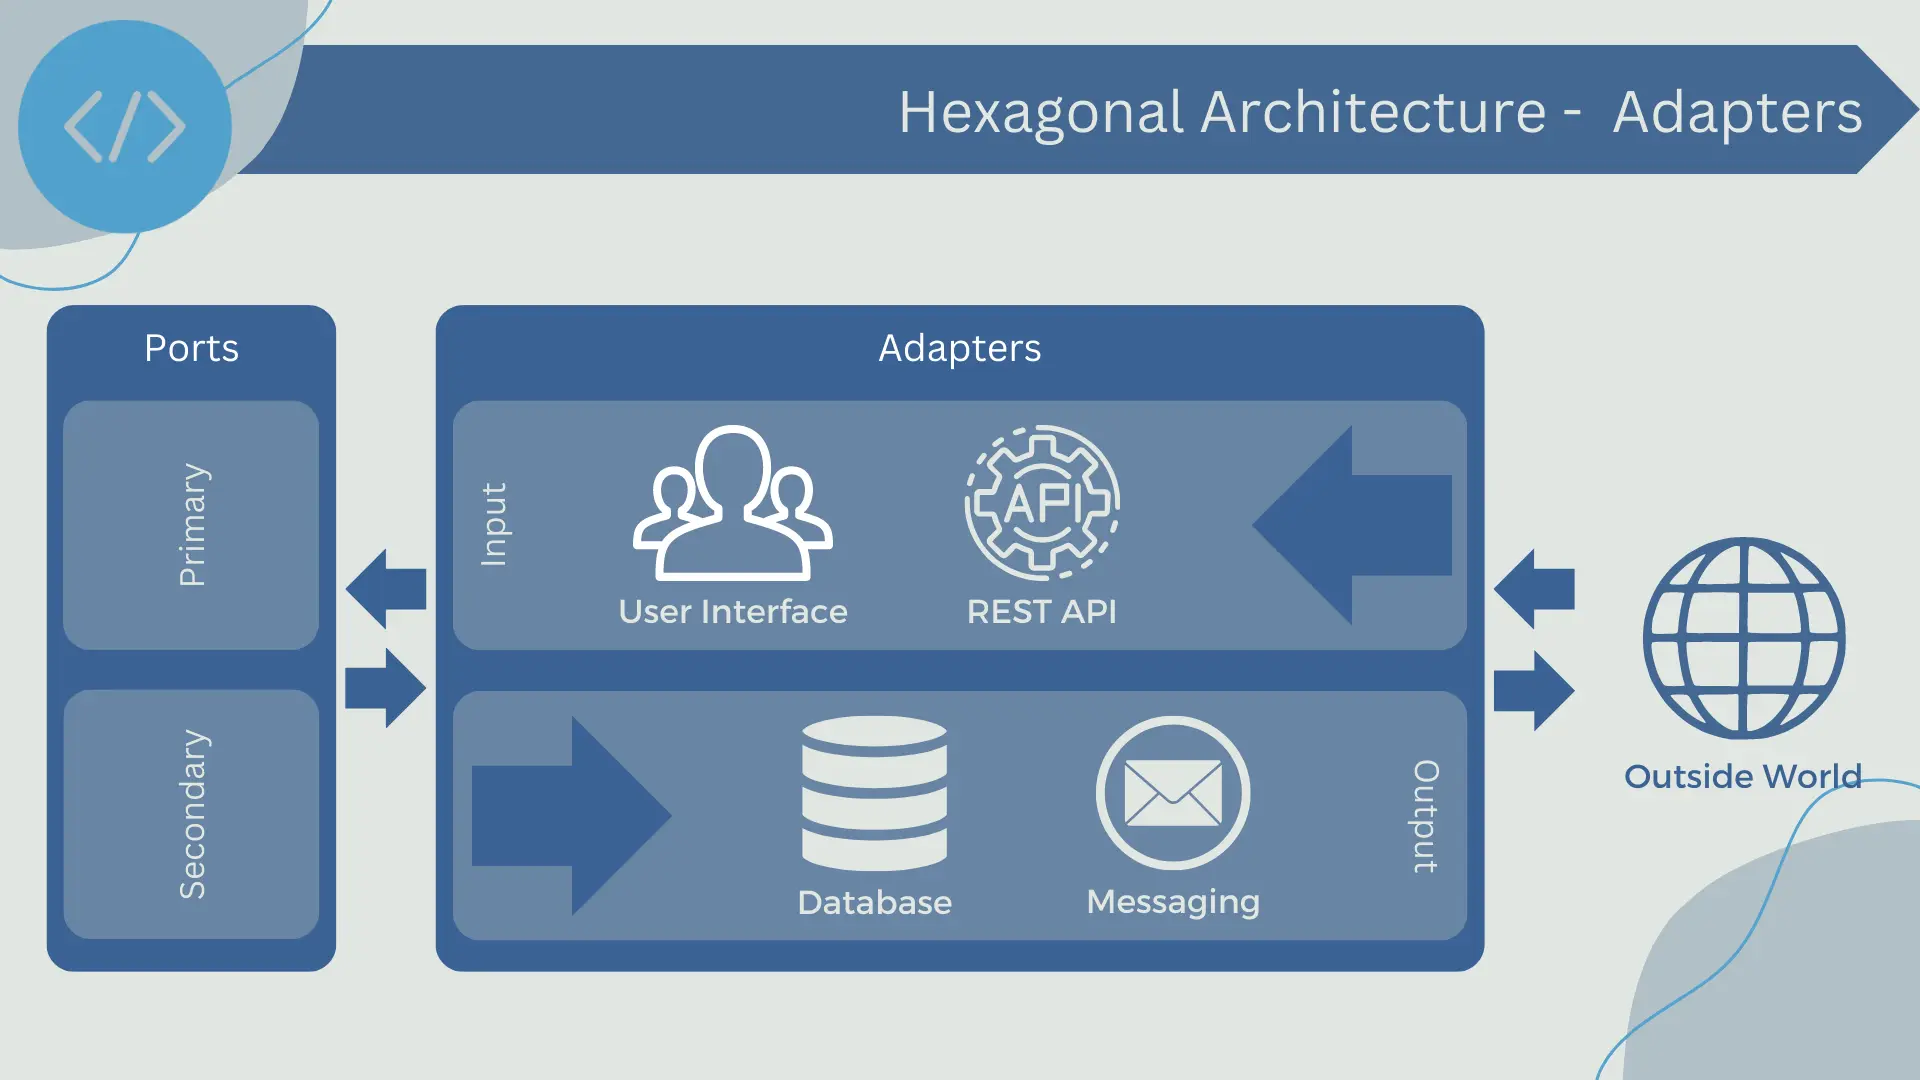 Adapters in hexagonal architecture